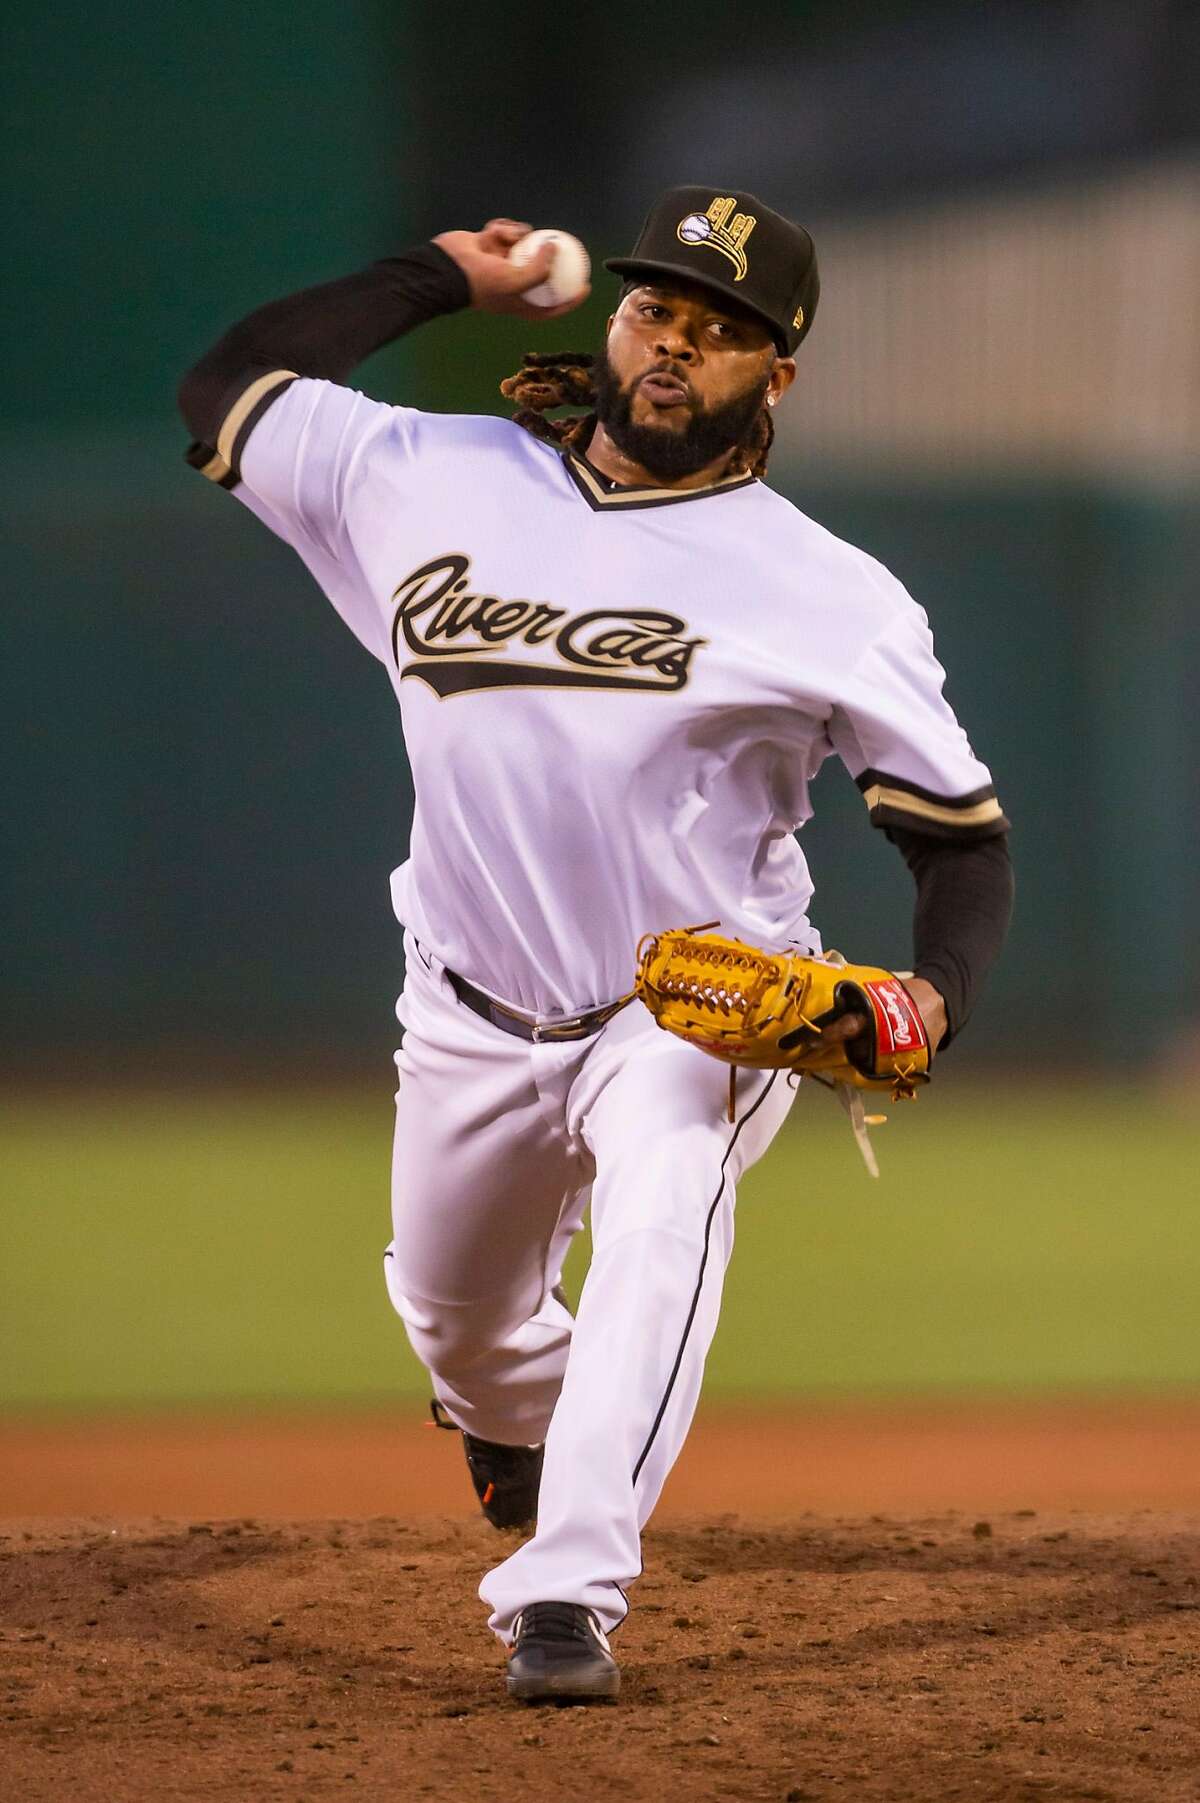 Giants pitcher Johnny Cueto makes one his first rehab starts for the Sacramento River Cats as he pitches against the Reno Aces at Raley Field, Monday Aug 26, 2019.